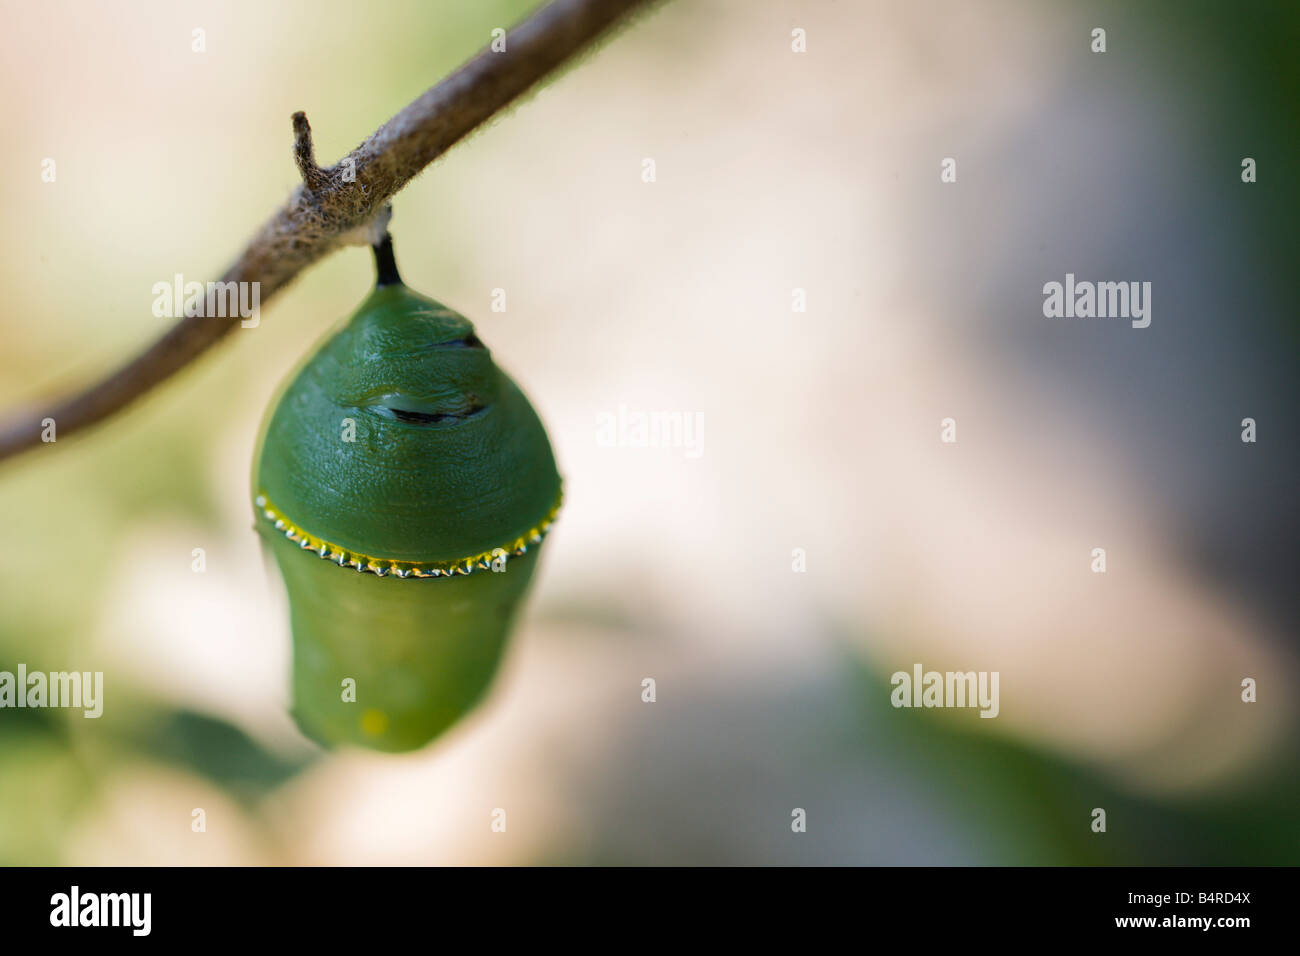 A monarch Chrysalis hangs from a twig in the garden, it's small gold spikes shimmering in the dappled sunlight. Stock Photo